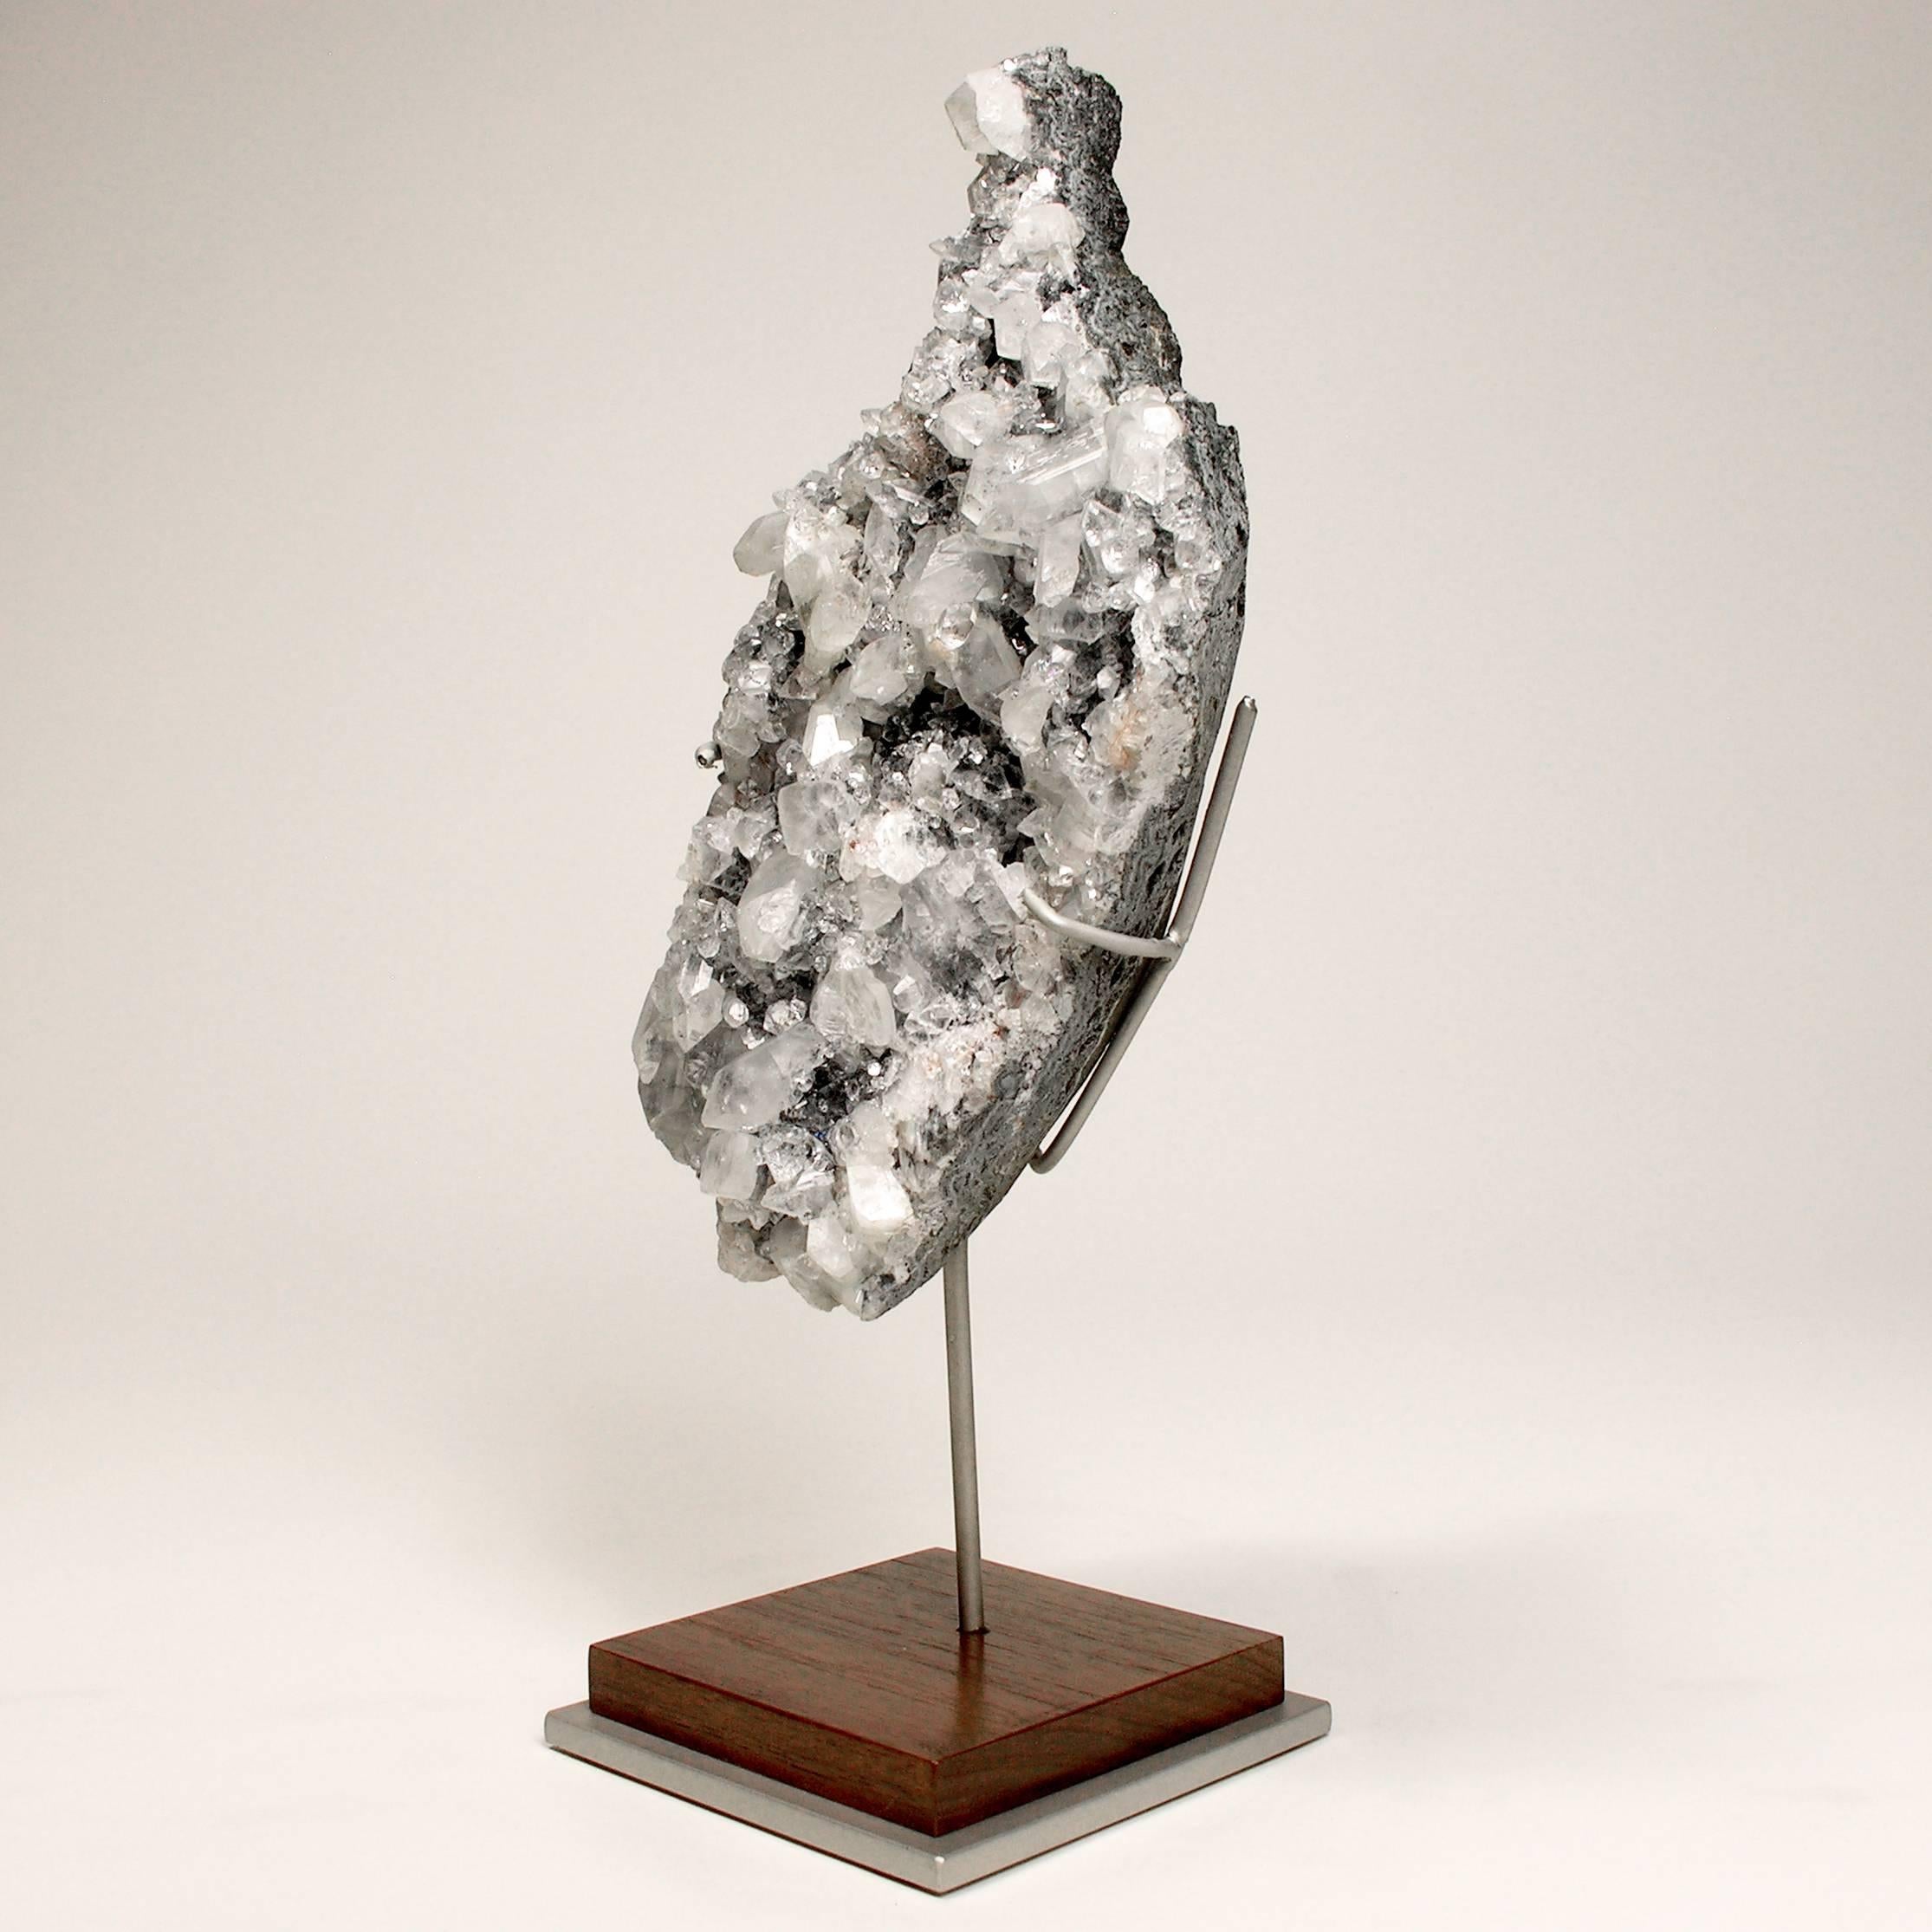 Mineral specimen sculpture Apophyllite grown on a crystal base
  
The abstract brilliant form hints at a dazzling figure. Part of a geode, mined in India. Custom mounted on a walnut and nickel painted armature.
  